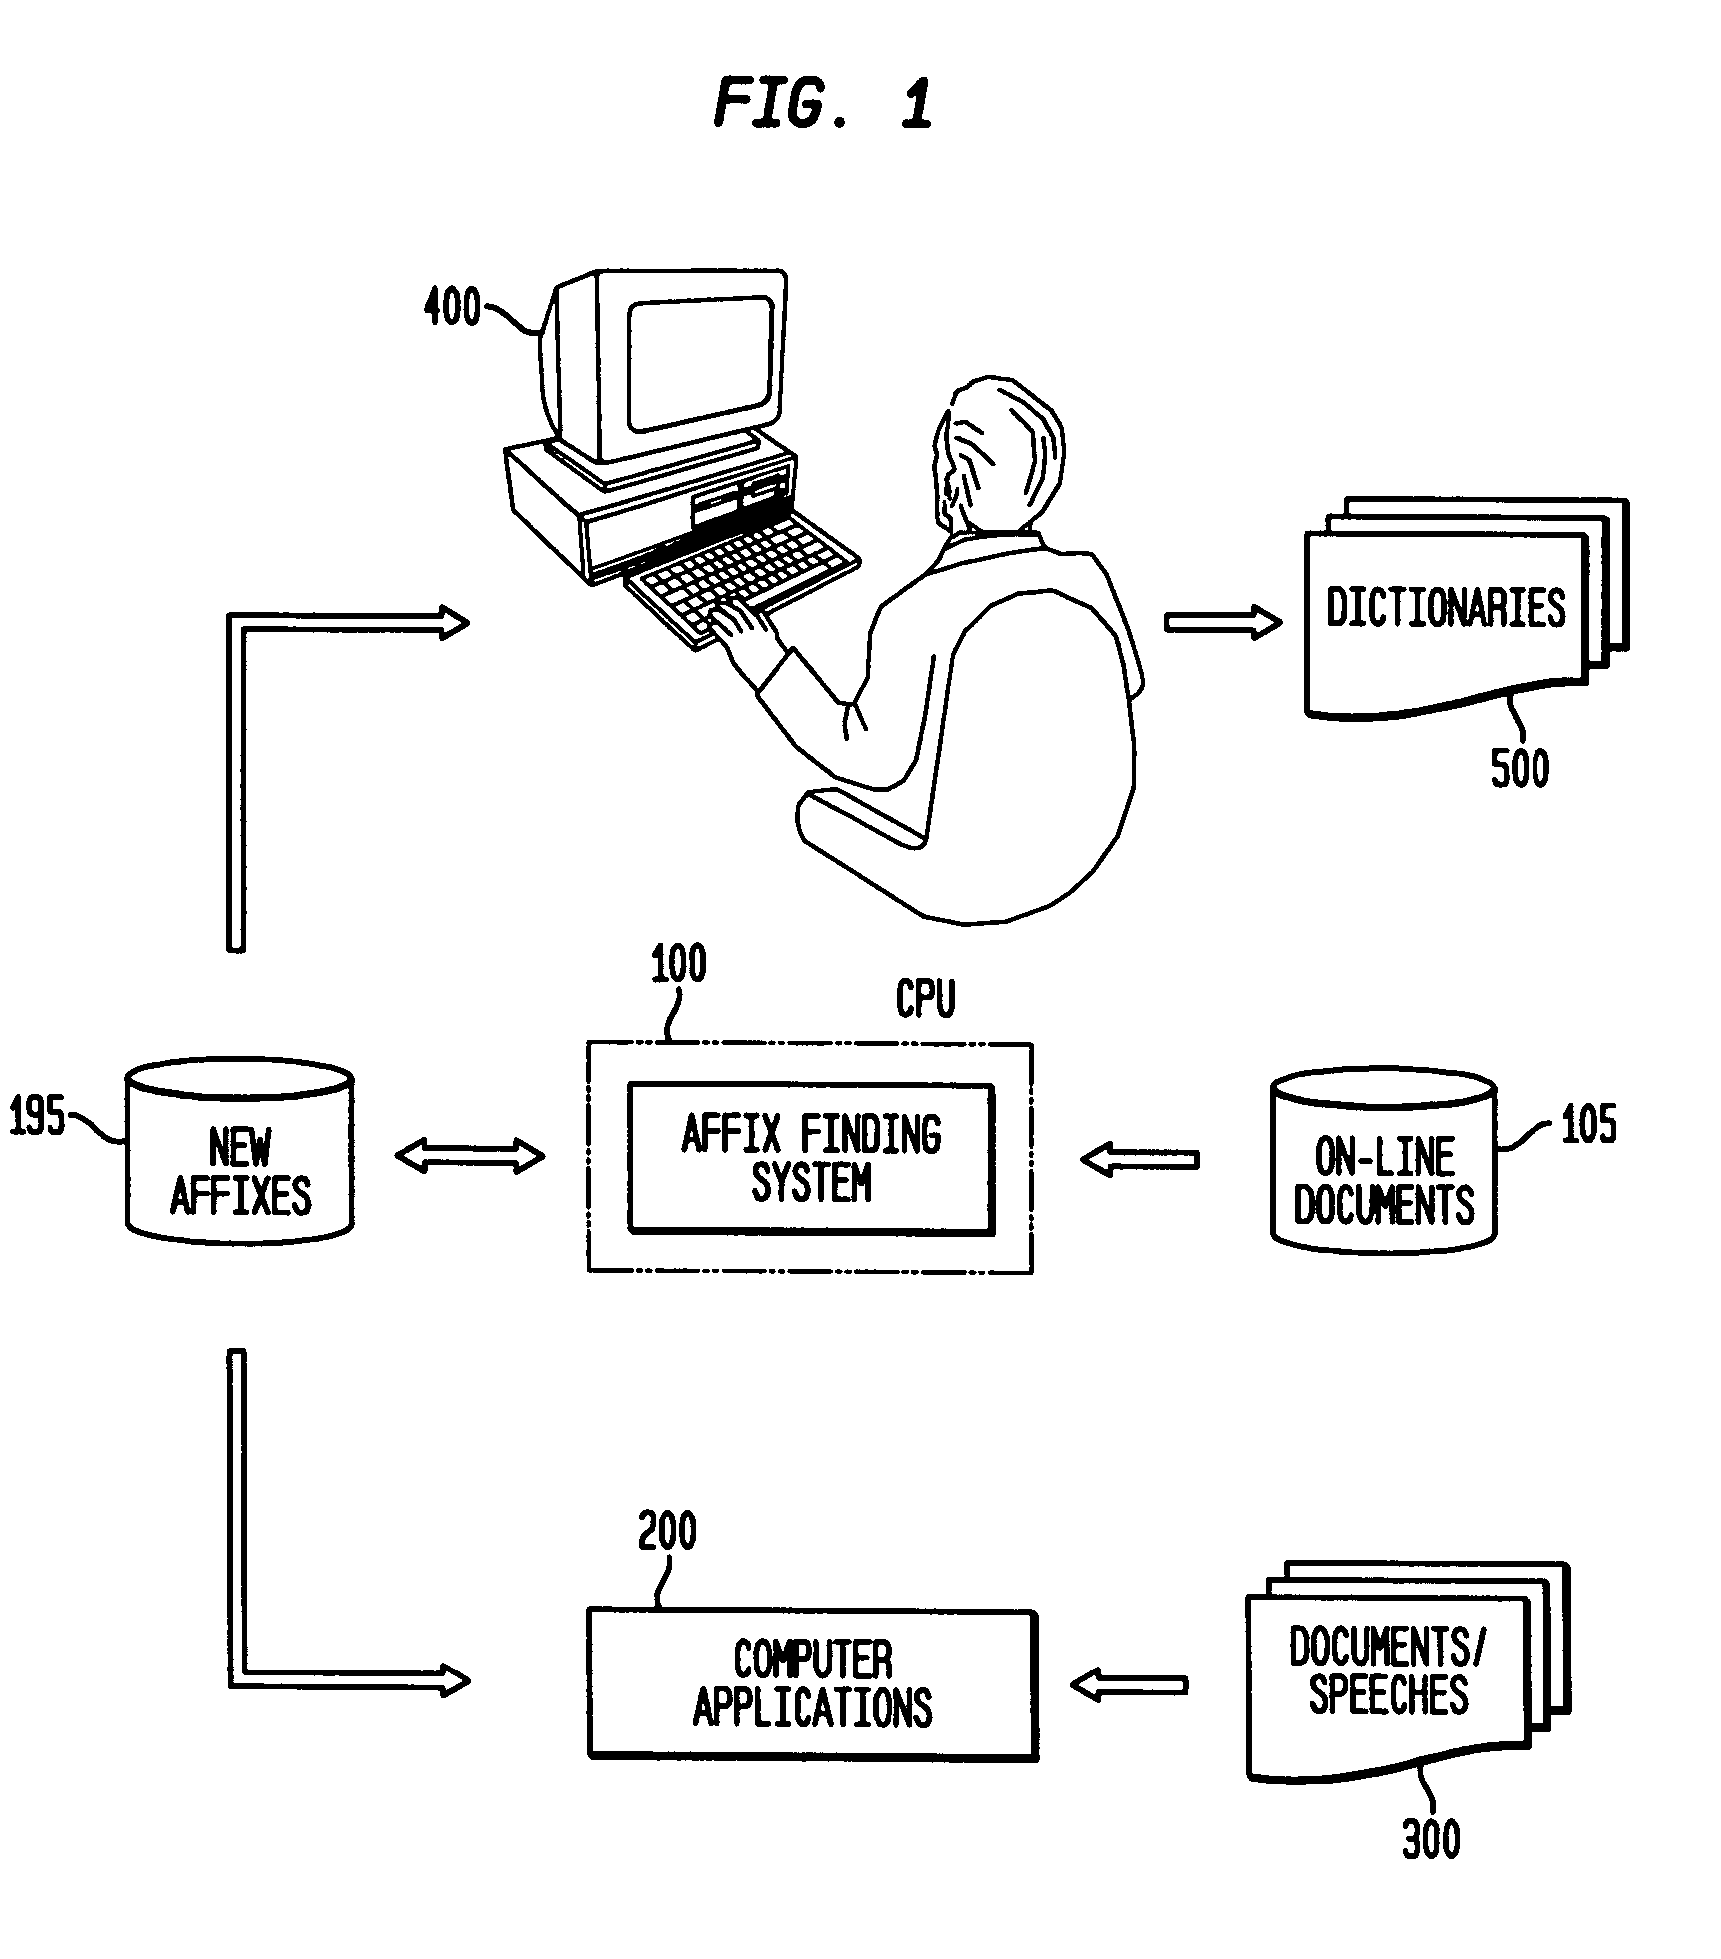 System and method for determining affixes of words